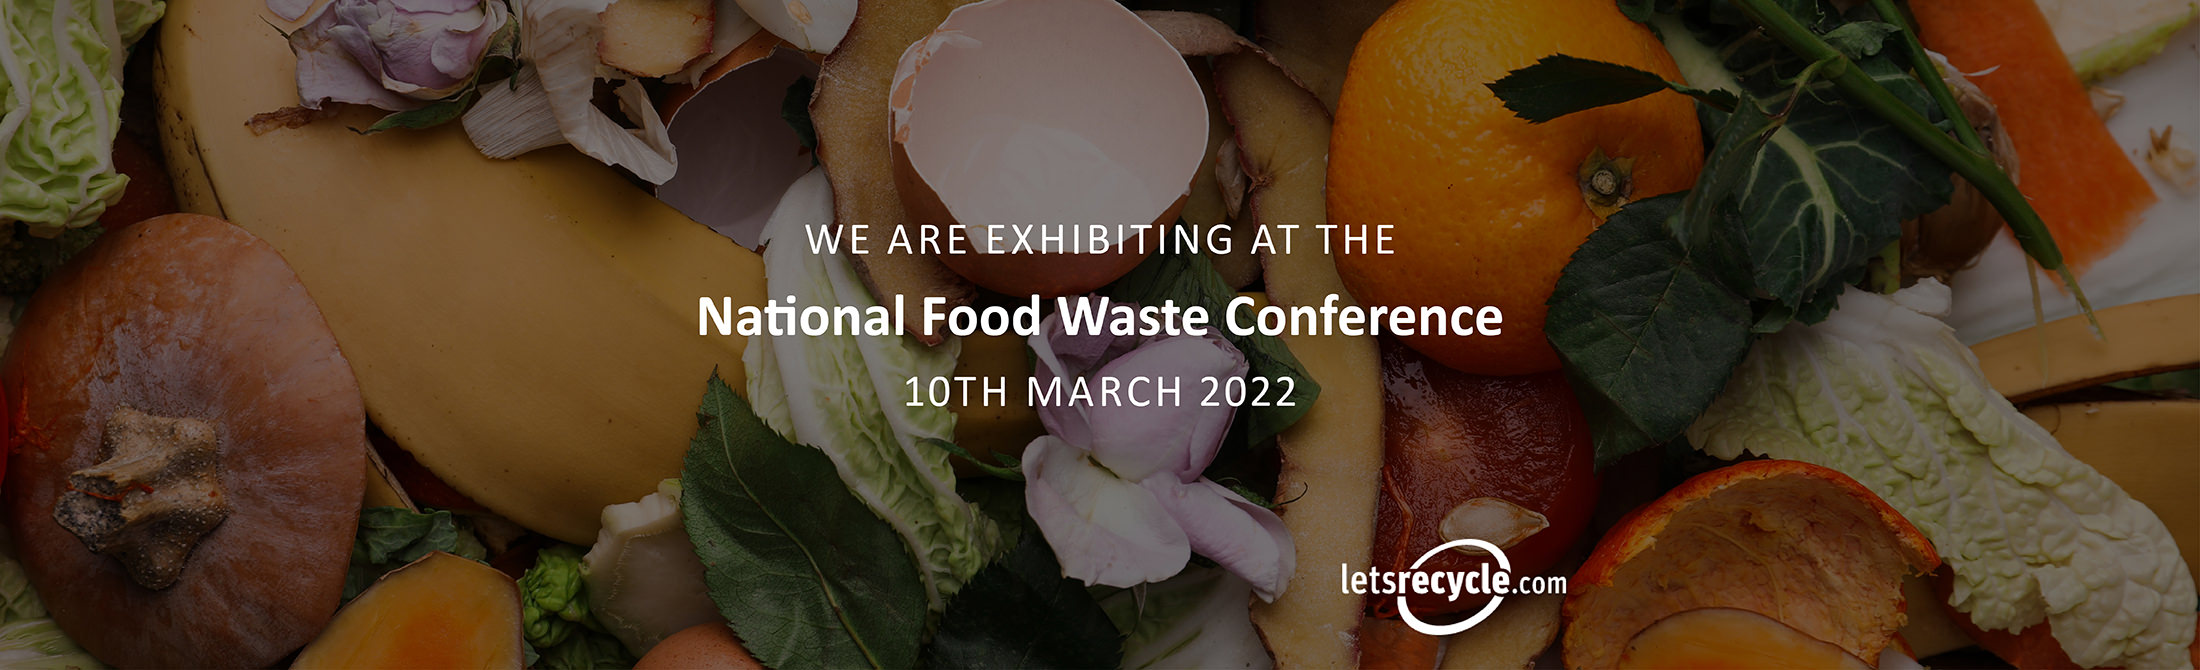 metroSTOR exhibits at the National Food Waste Conference Streetspace